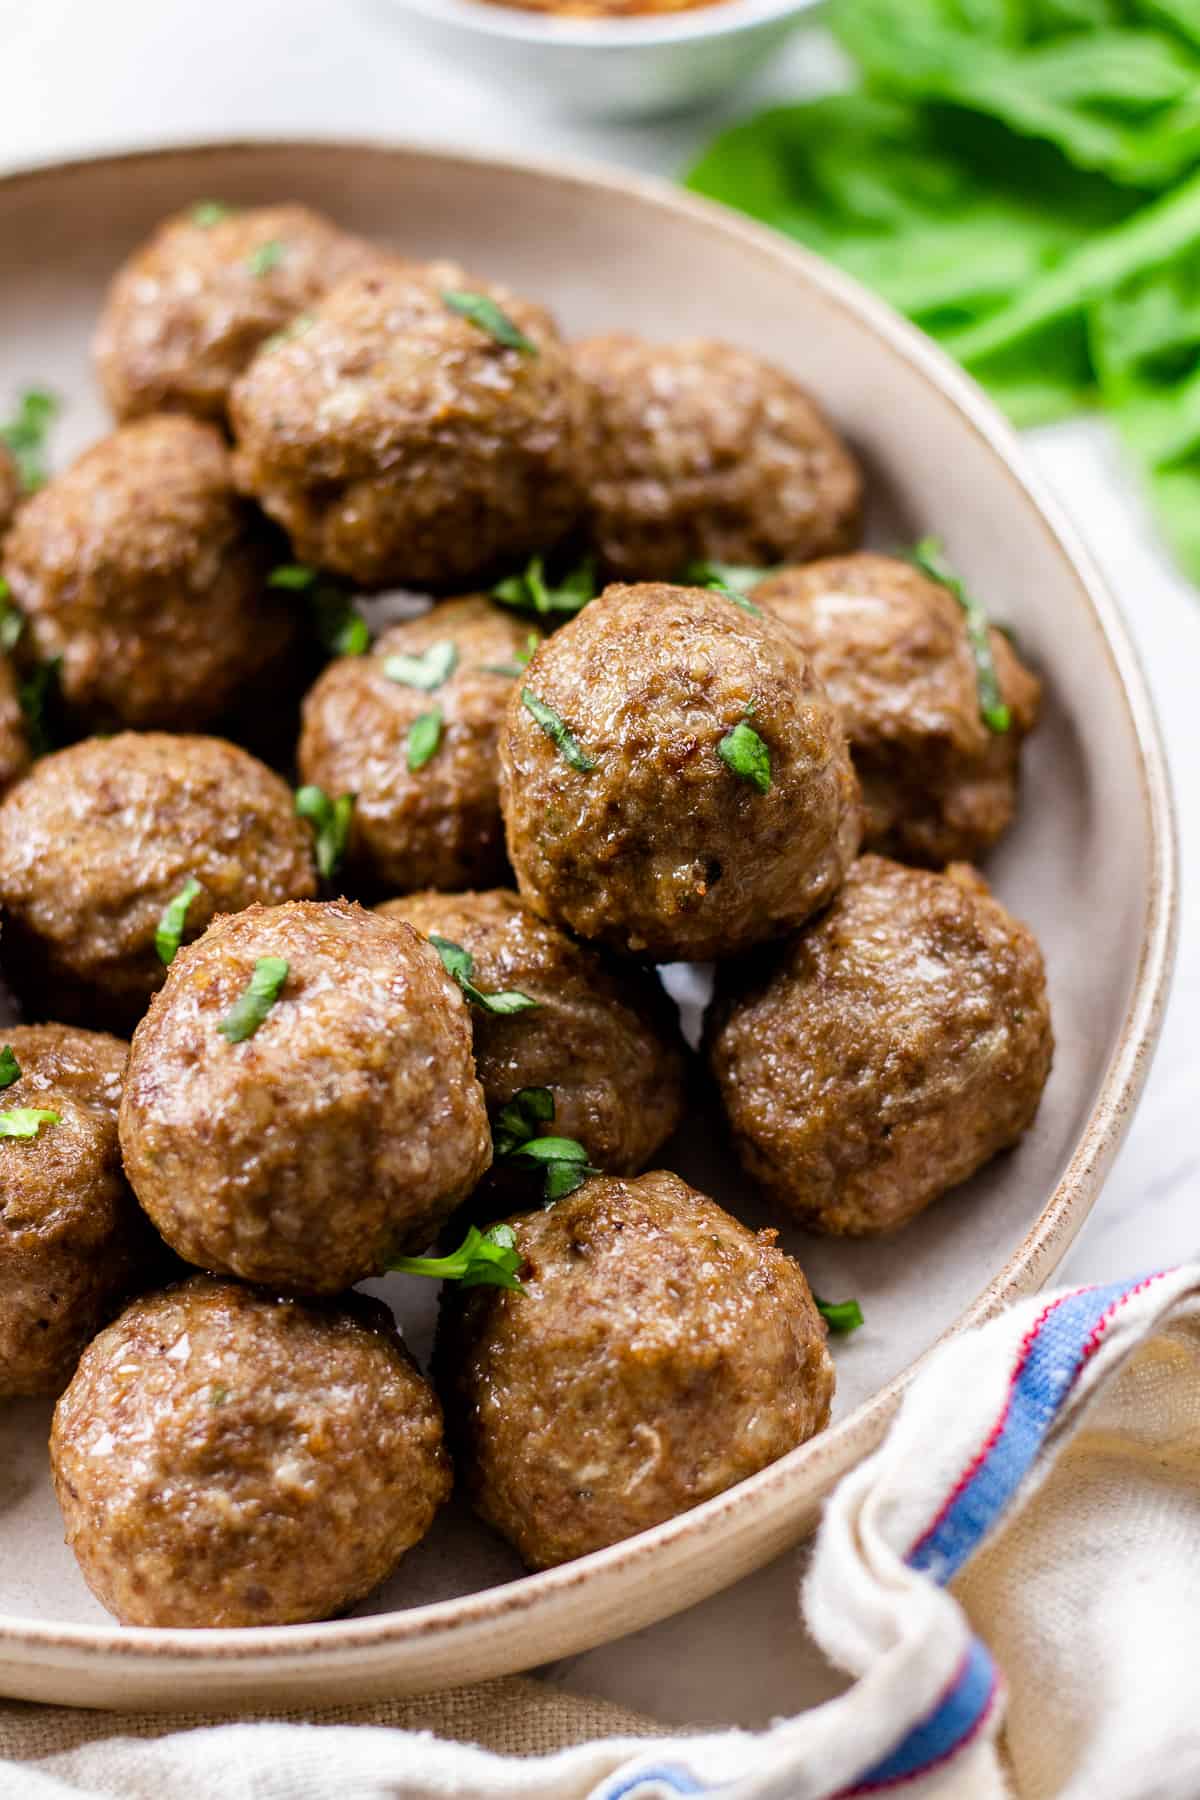 Cooked meatballs served on a plate.